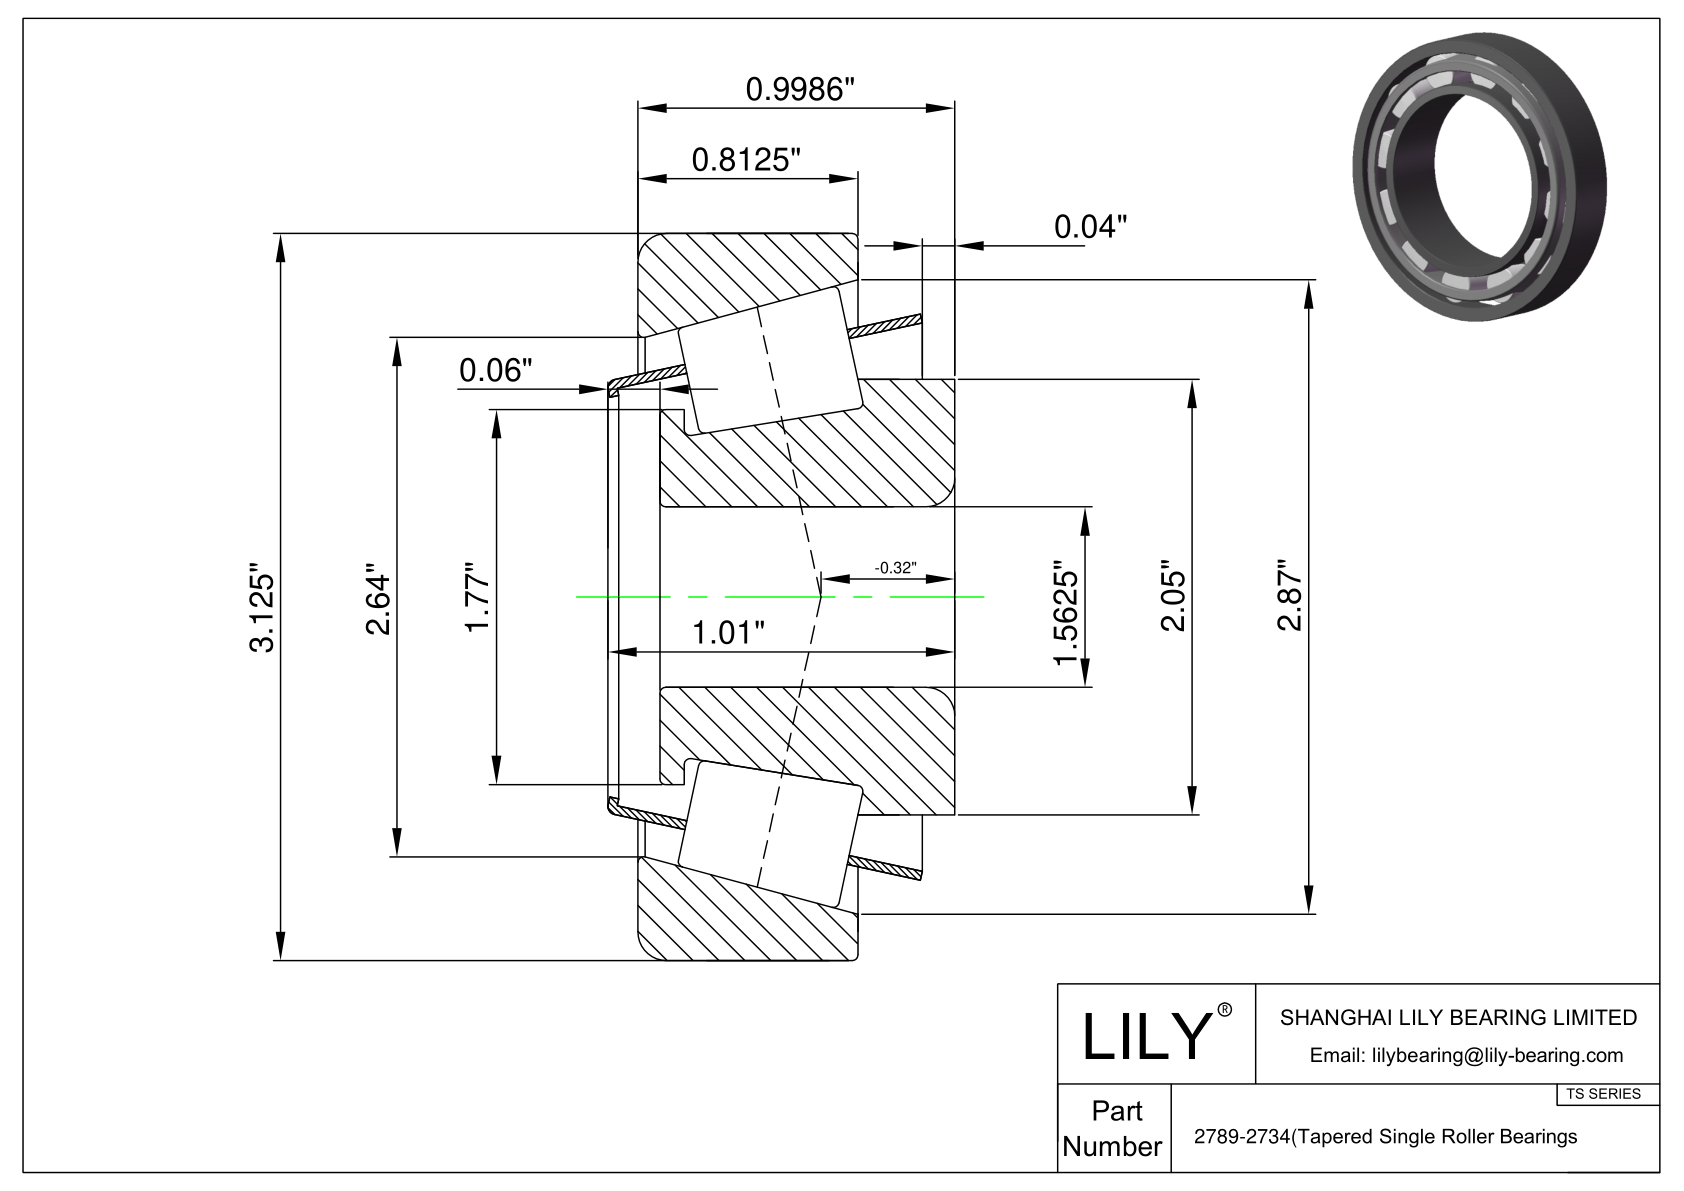 2789-2734 TS (Tapered Single Roller Bearings) (Imperial) cad drawing